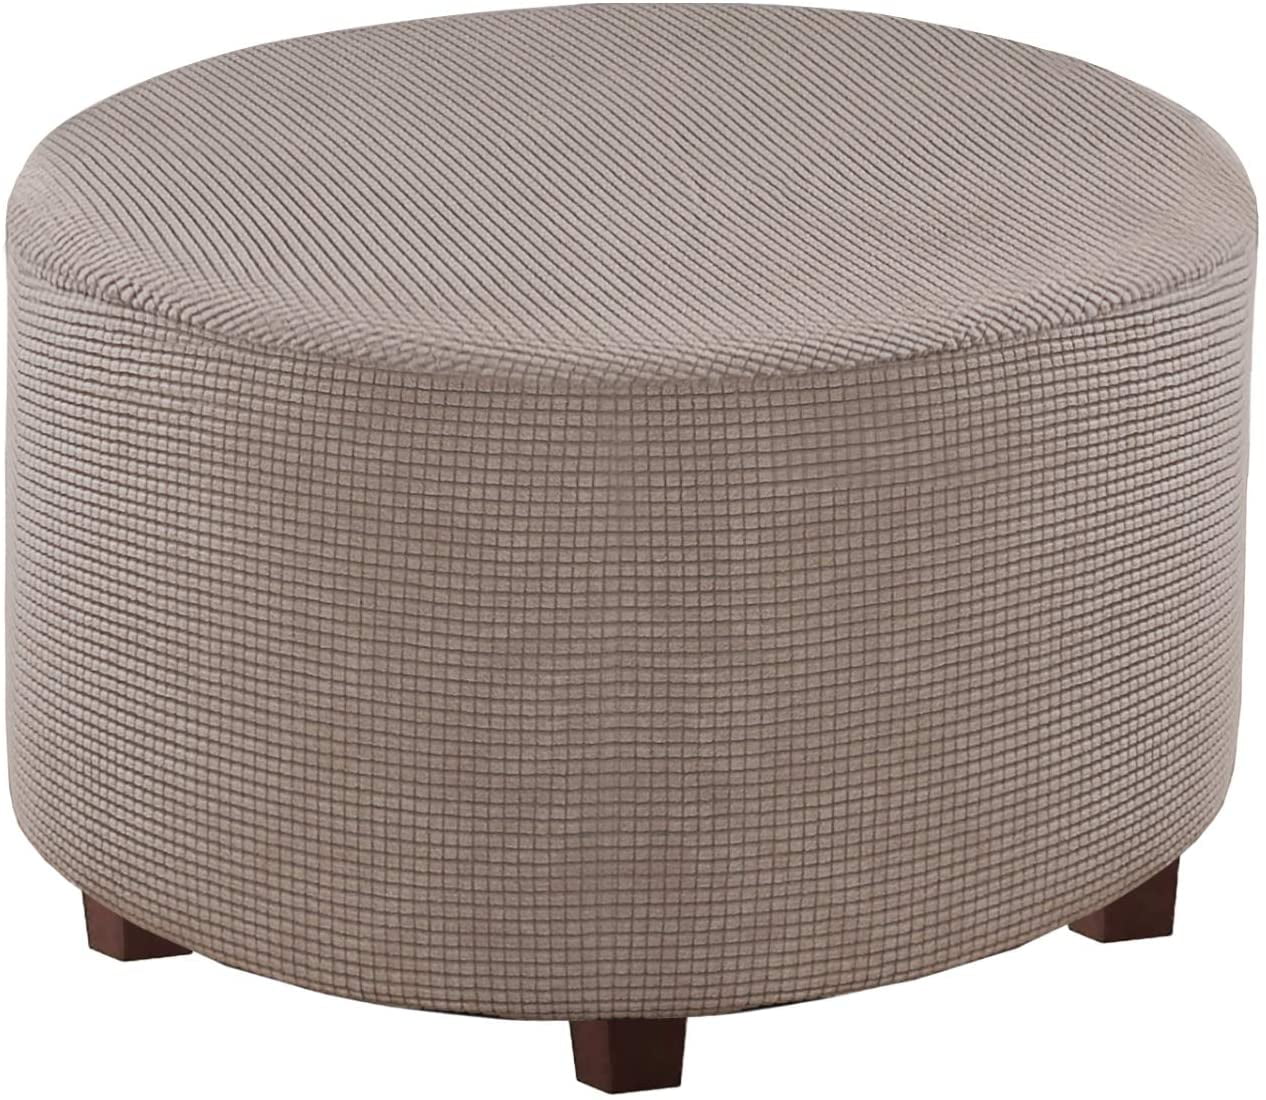 Details about   Small Ottoman Cover Stretch Fabric Sofa Slipcover Footstool Cover Protector 